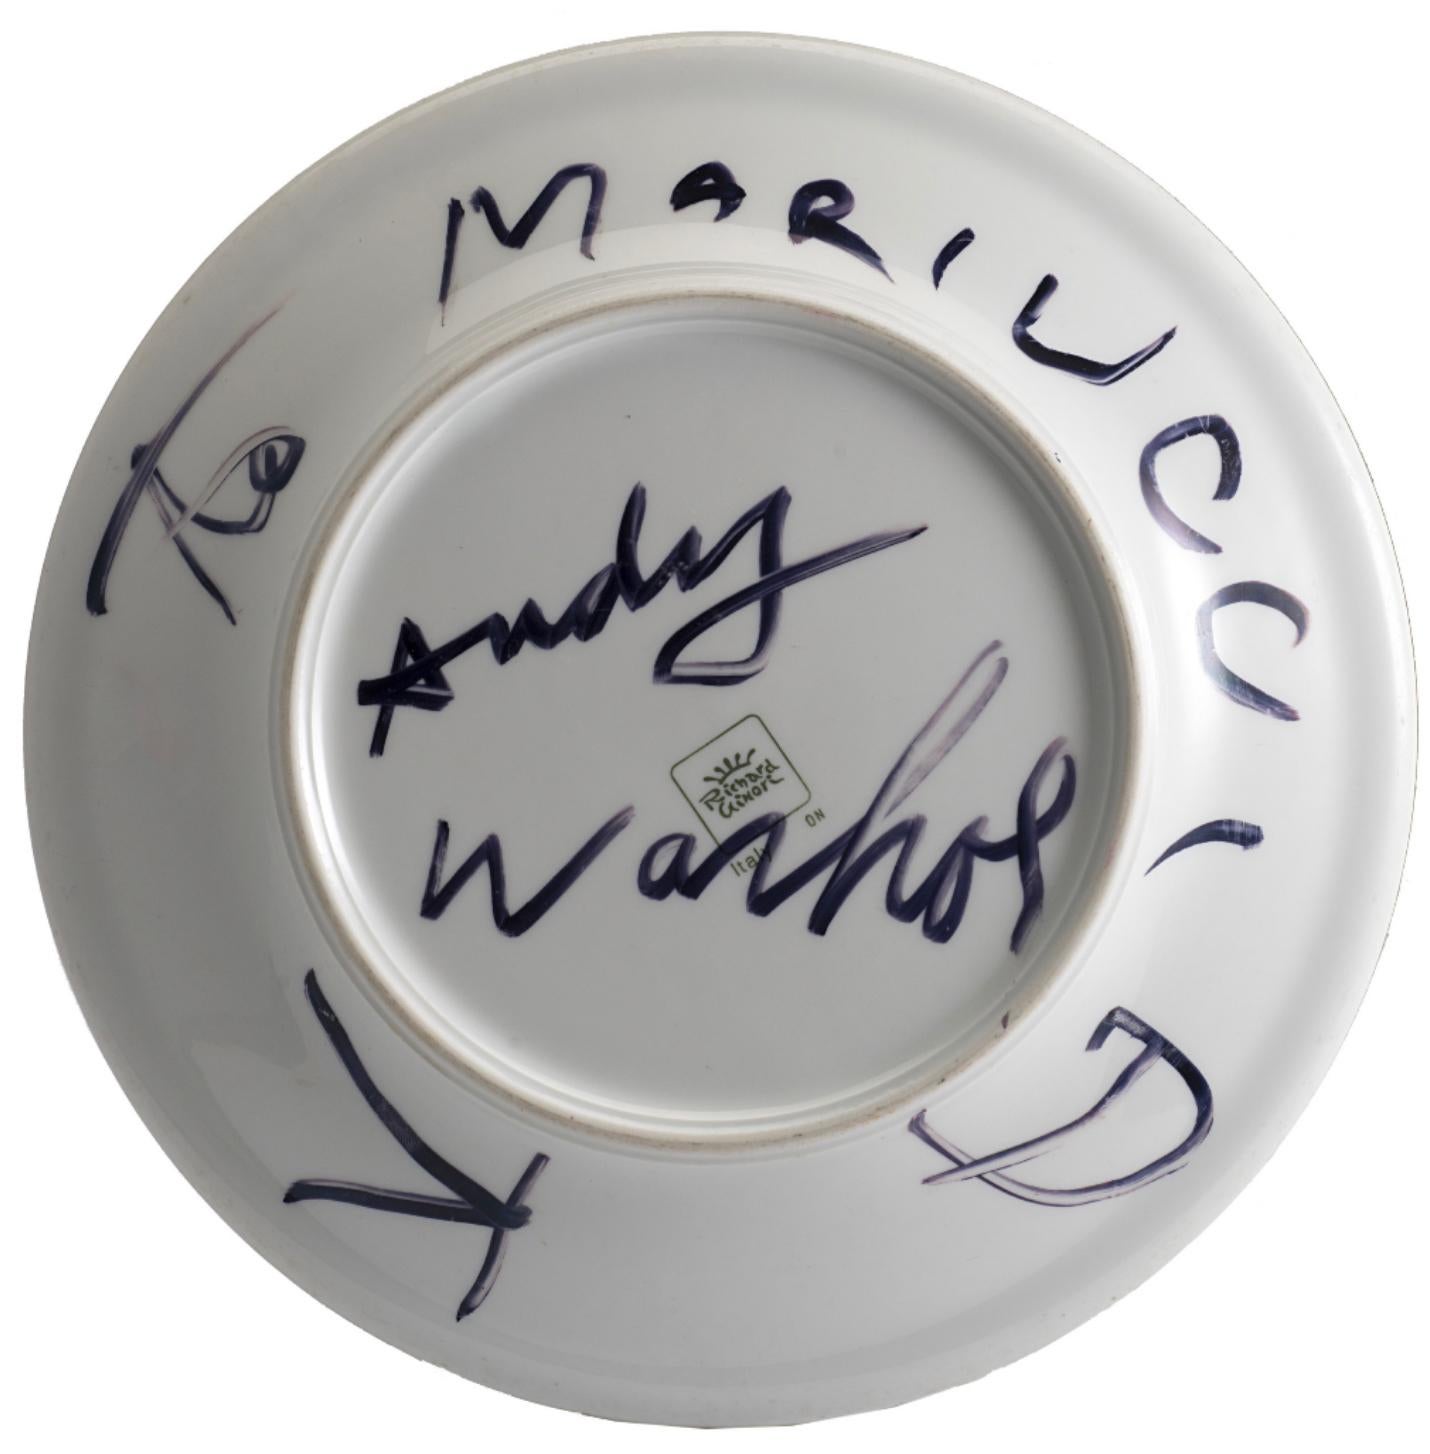 Tigar, Andy Warhol, American Art, Post-War, Unique piece, Porcelain, 1980's 

Marker on porcelain
Signed and dedicated on the back : to Mariuccia / Andy Warhol / D K

Provenance :
Private Collection, Italia

Along with his career, Andy Warhol